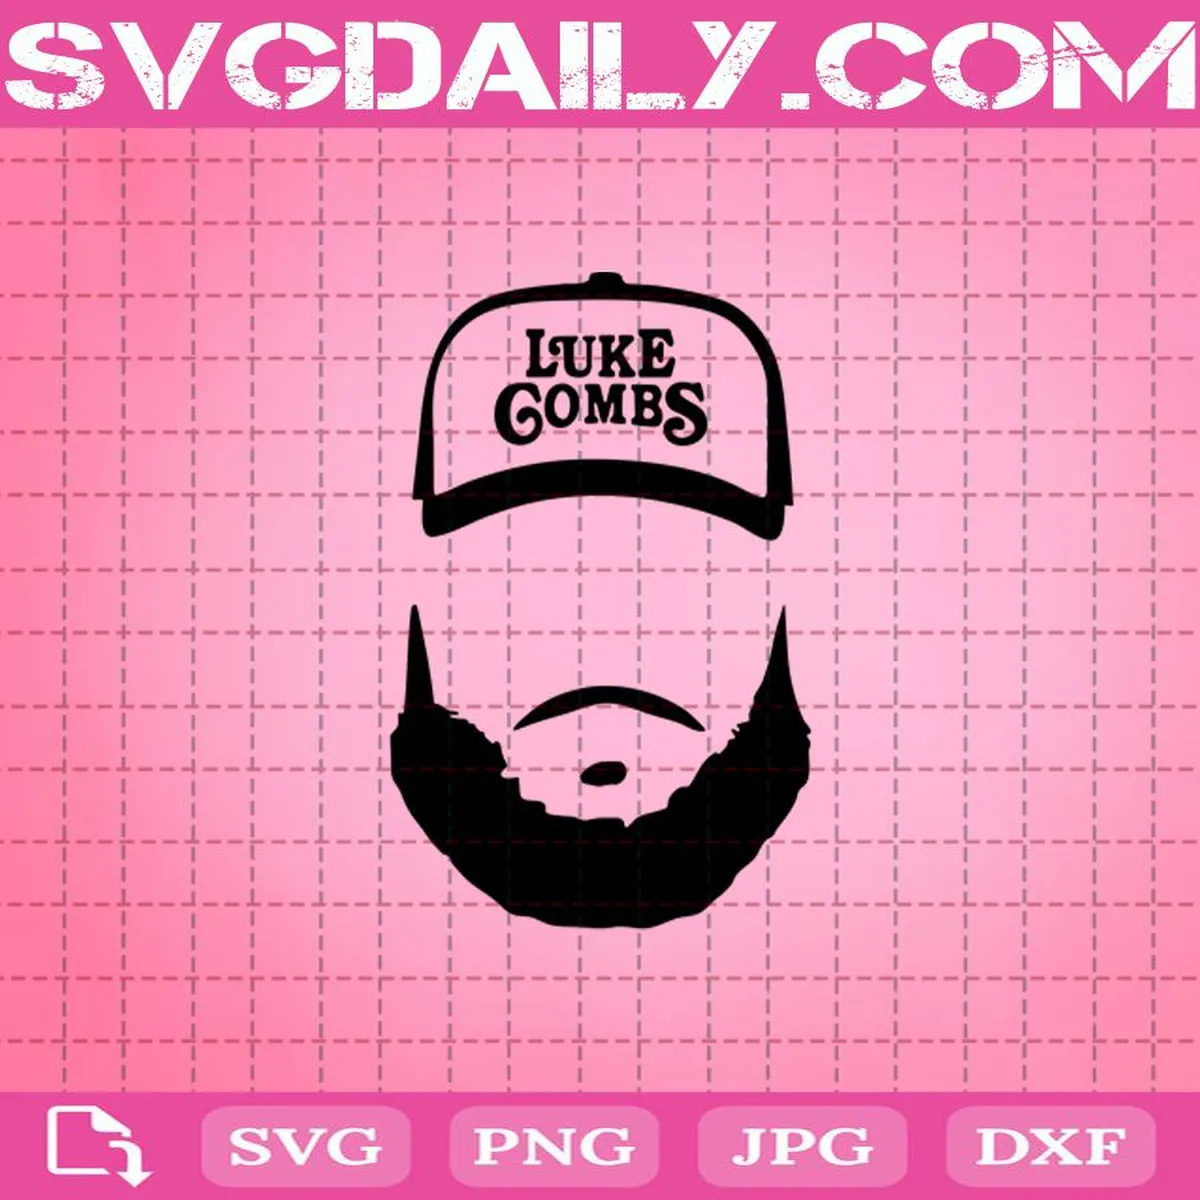 Luke Combs Svg, Singers Musicians Svg, Country Music Svg, Music Svg, Singers Svg, Luke Combs Singers Svg